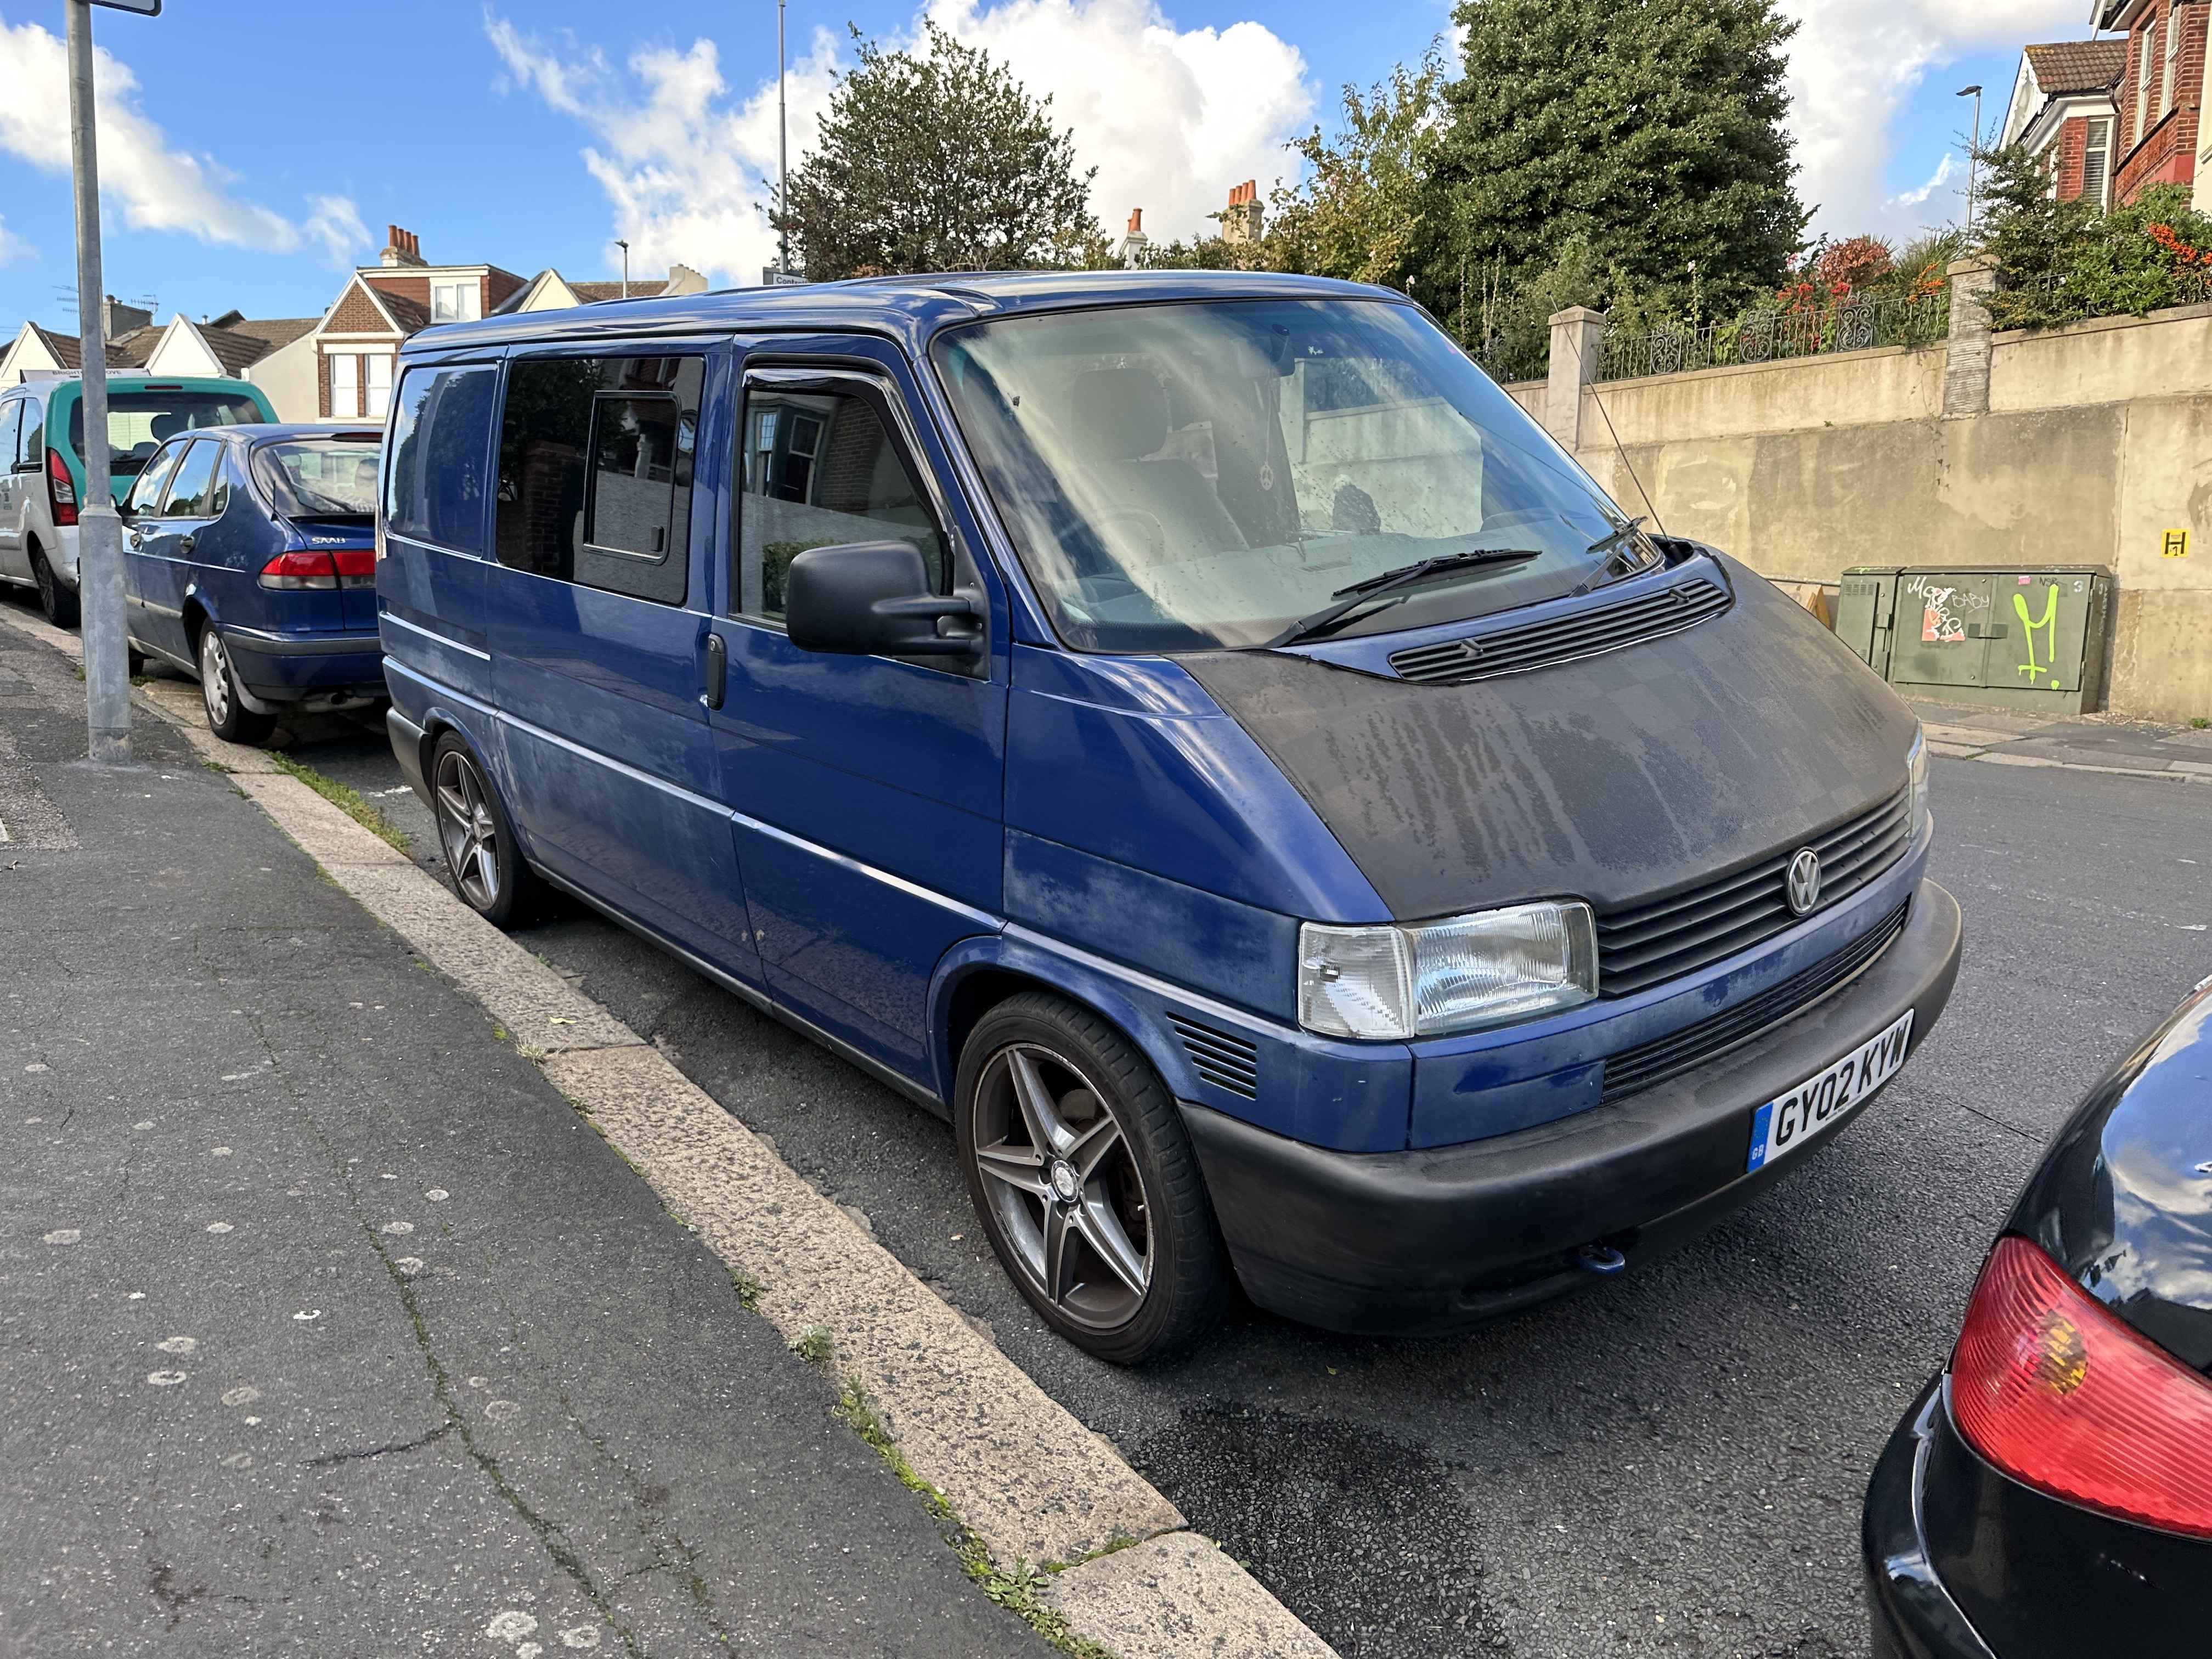 Photograph of GY02 KYW - a Blue Volkswagen Transporter camper van parked in Hollingdean by a non-resident. The seventh of eighteen photographs supplied by the residents of Hollingdean.